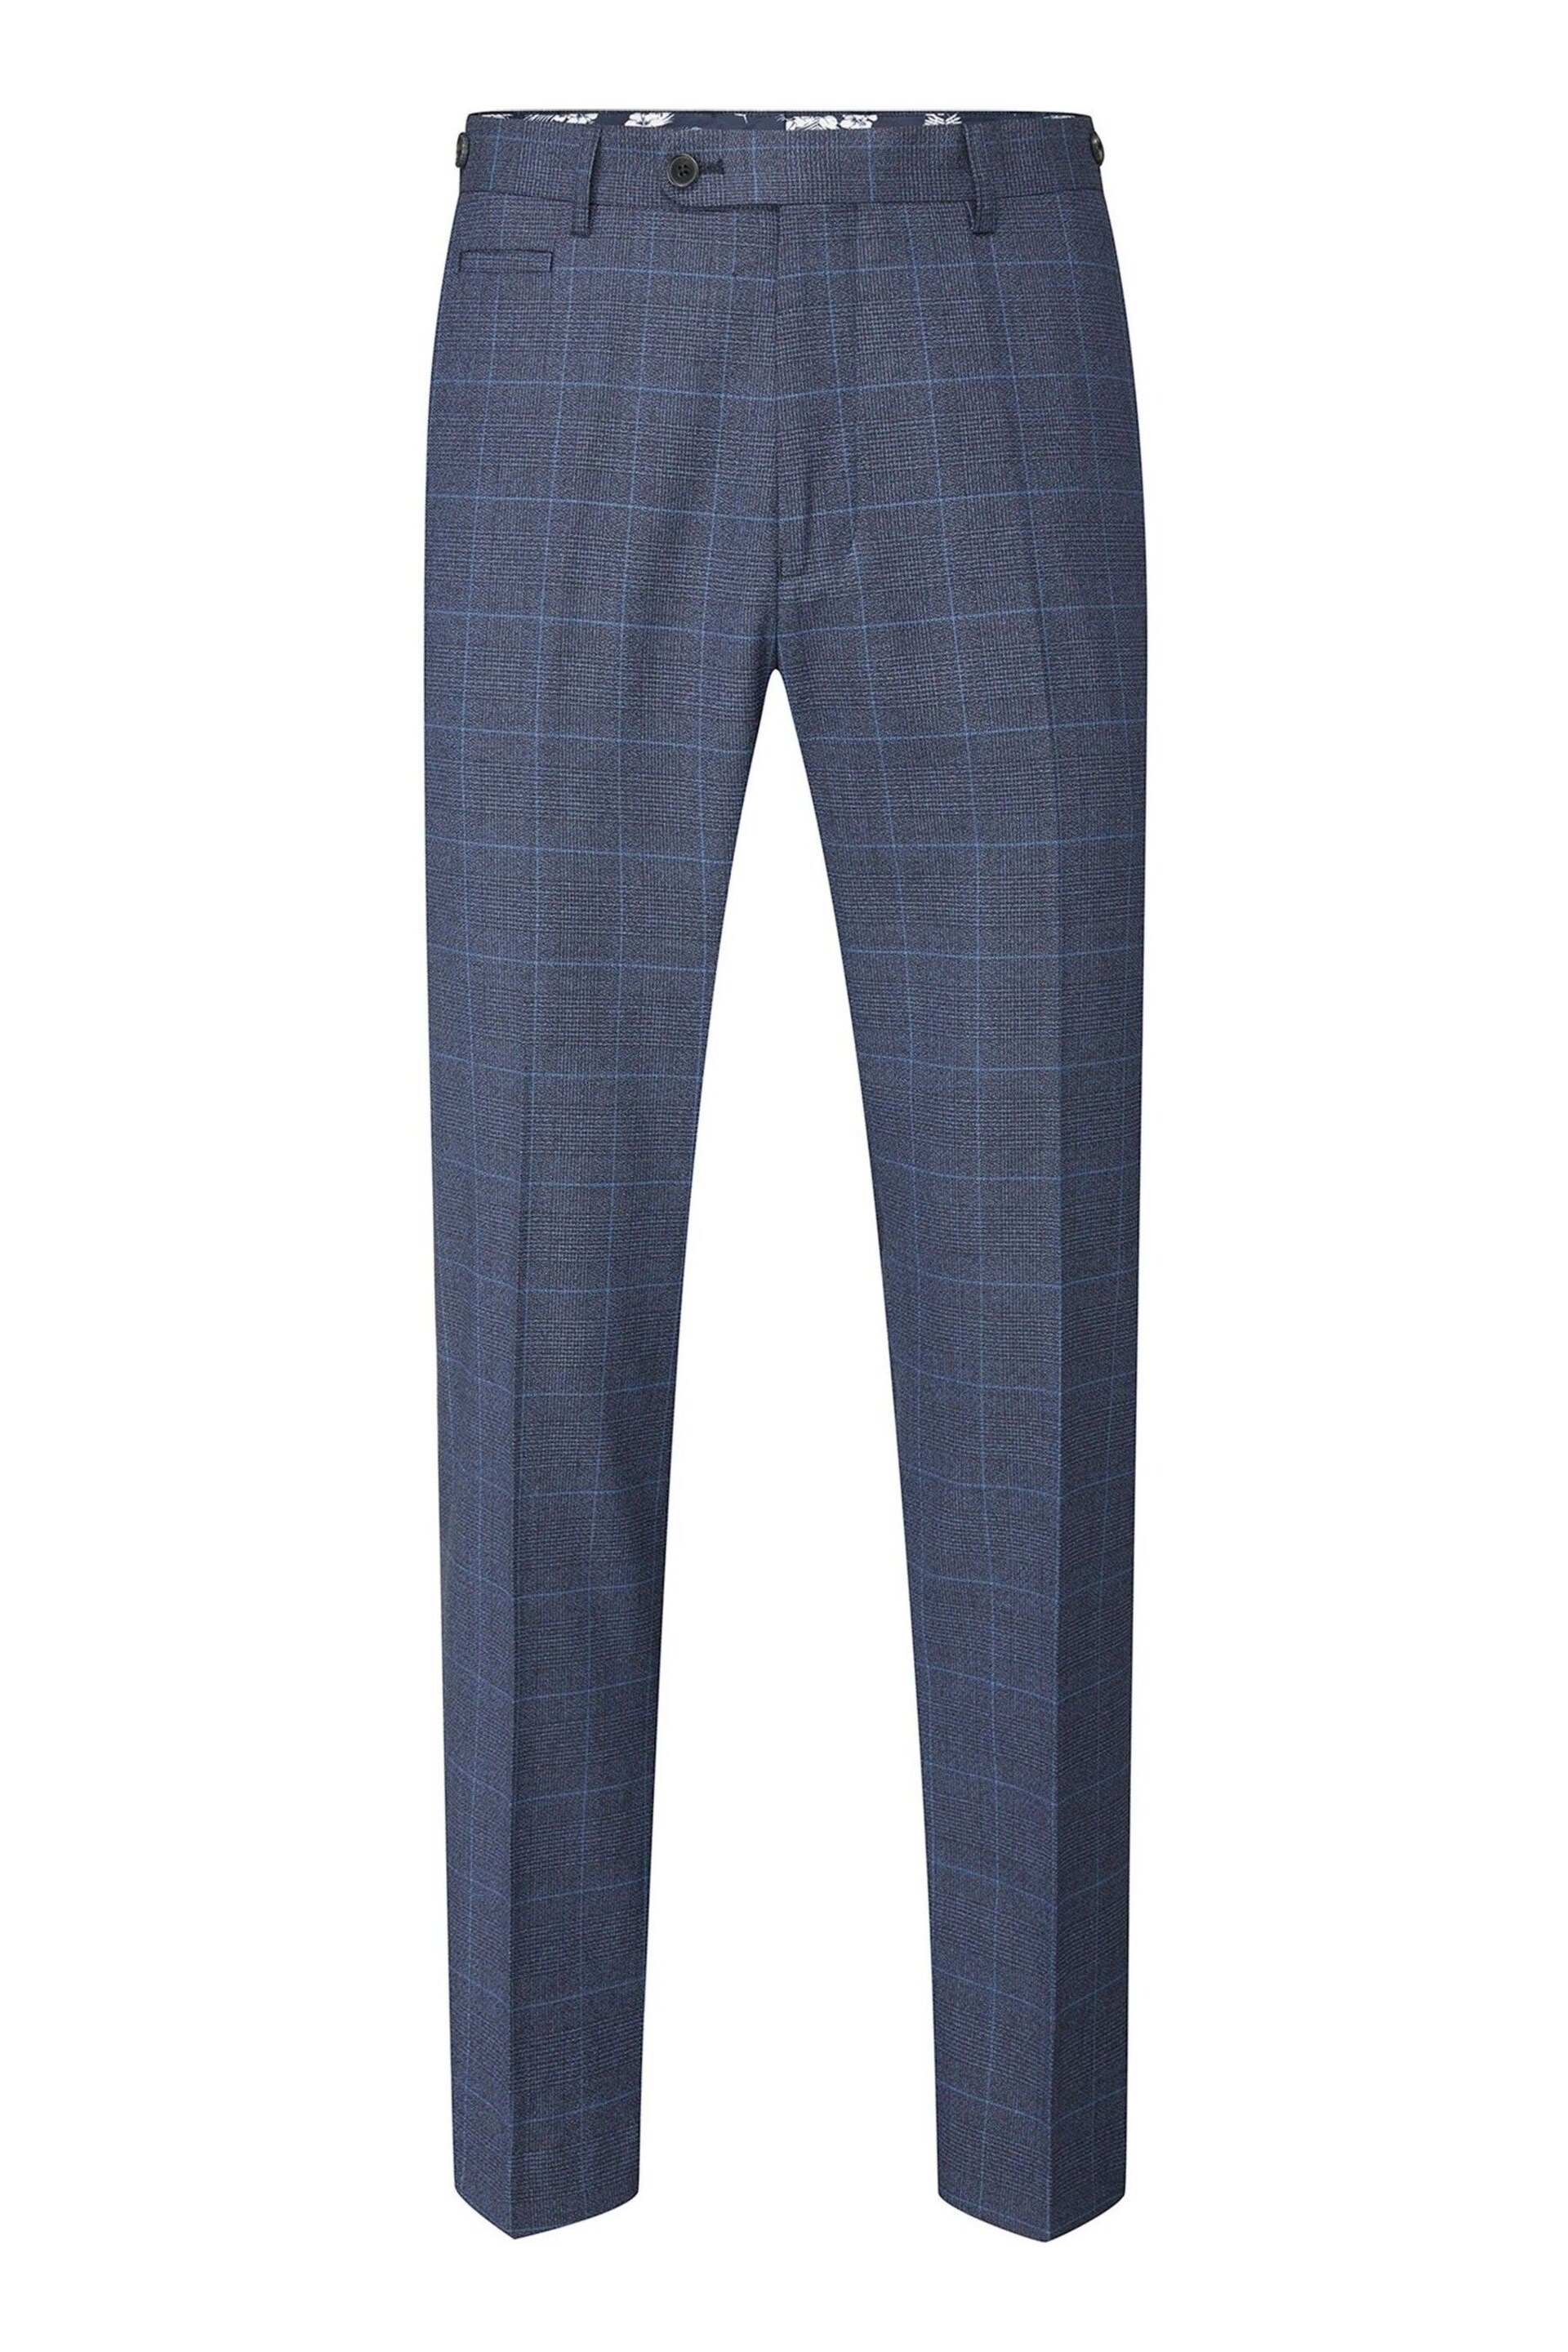 Skopes Anello Check Tailored Fit Suit Trousers - Image 2 of 3